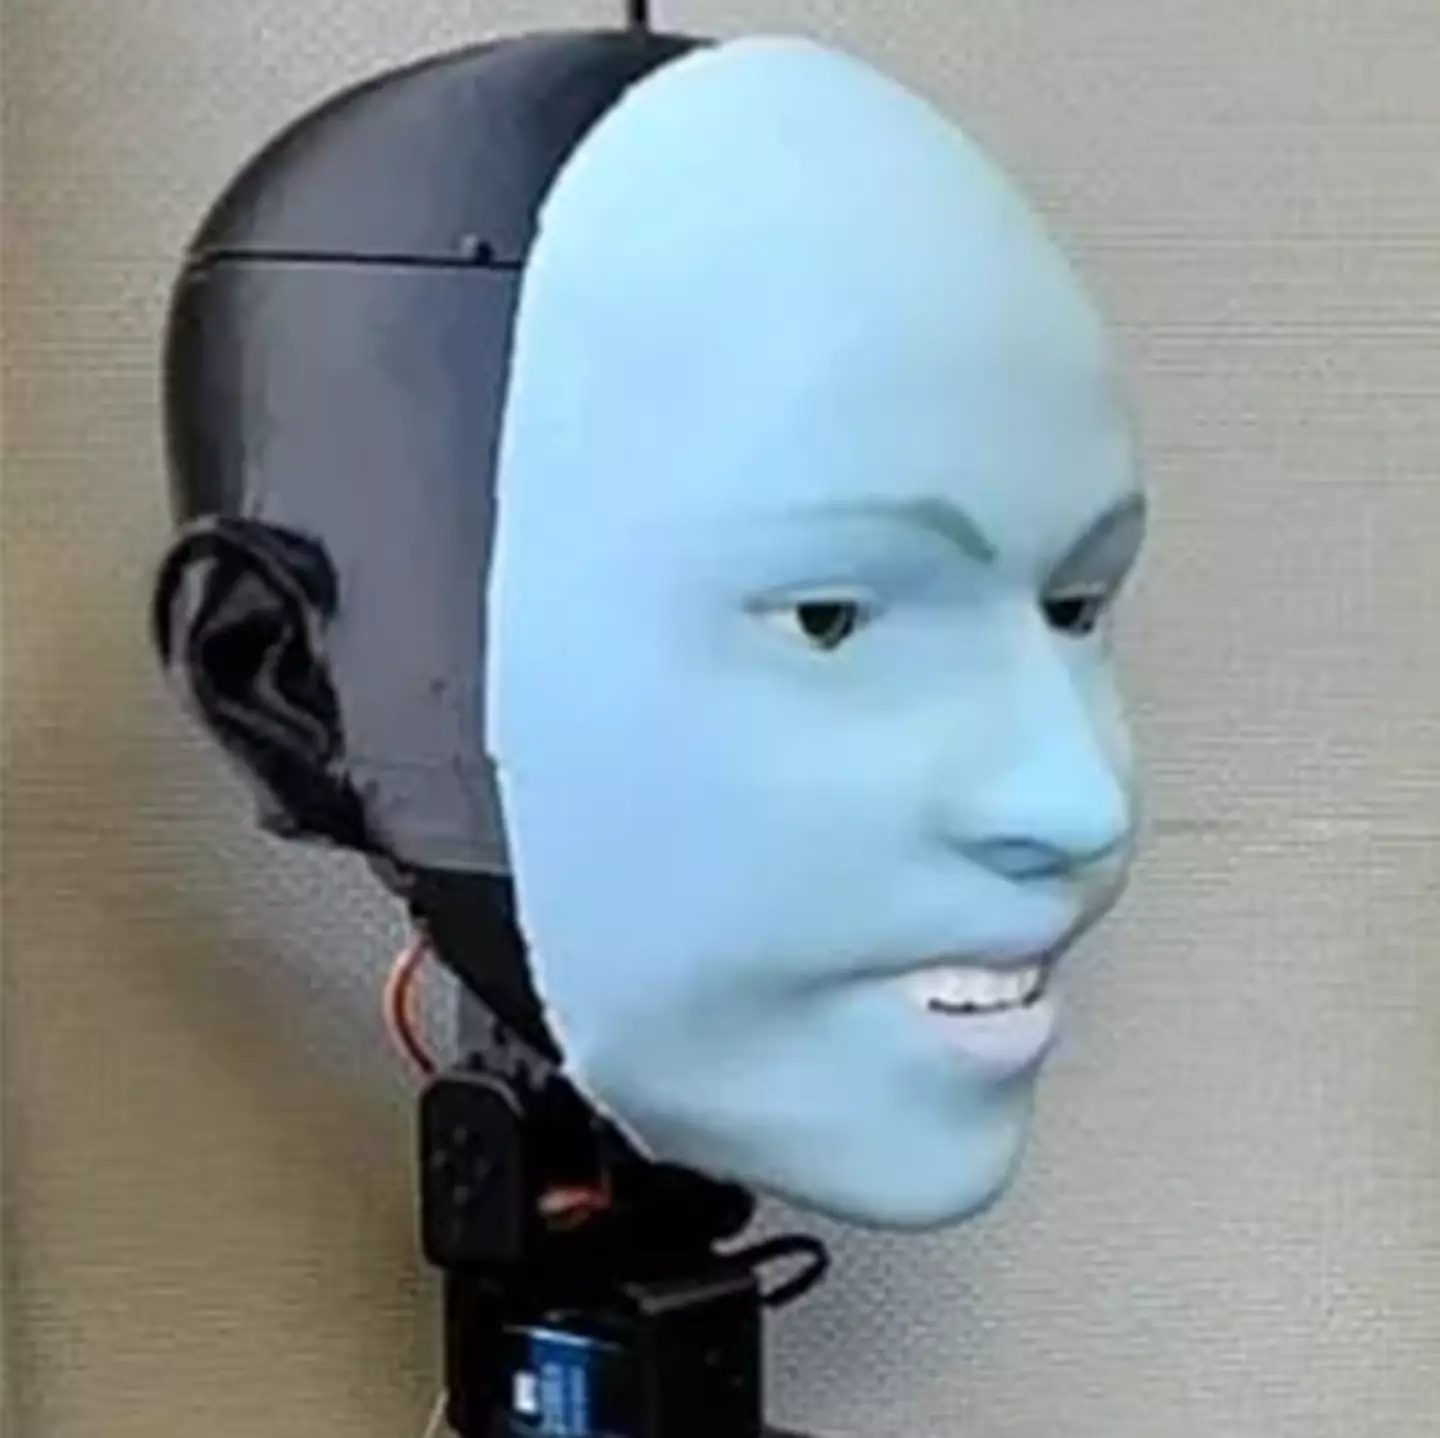 Scientists create creepy robot that can smile back at you